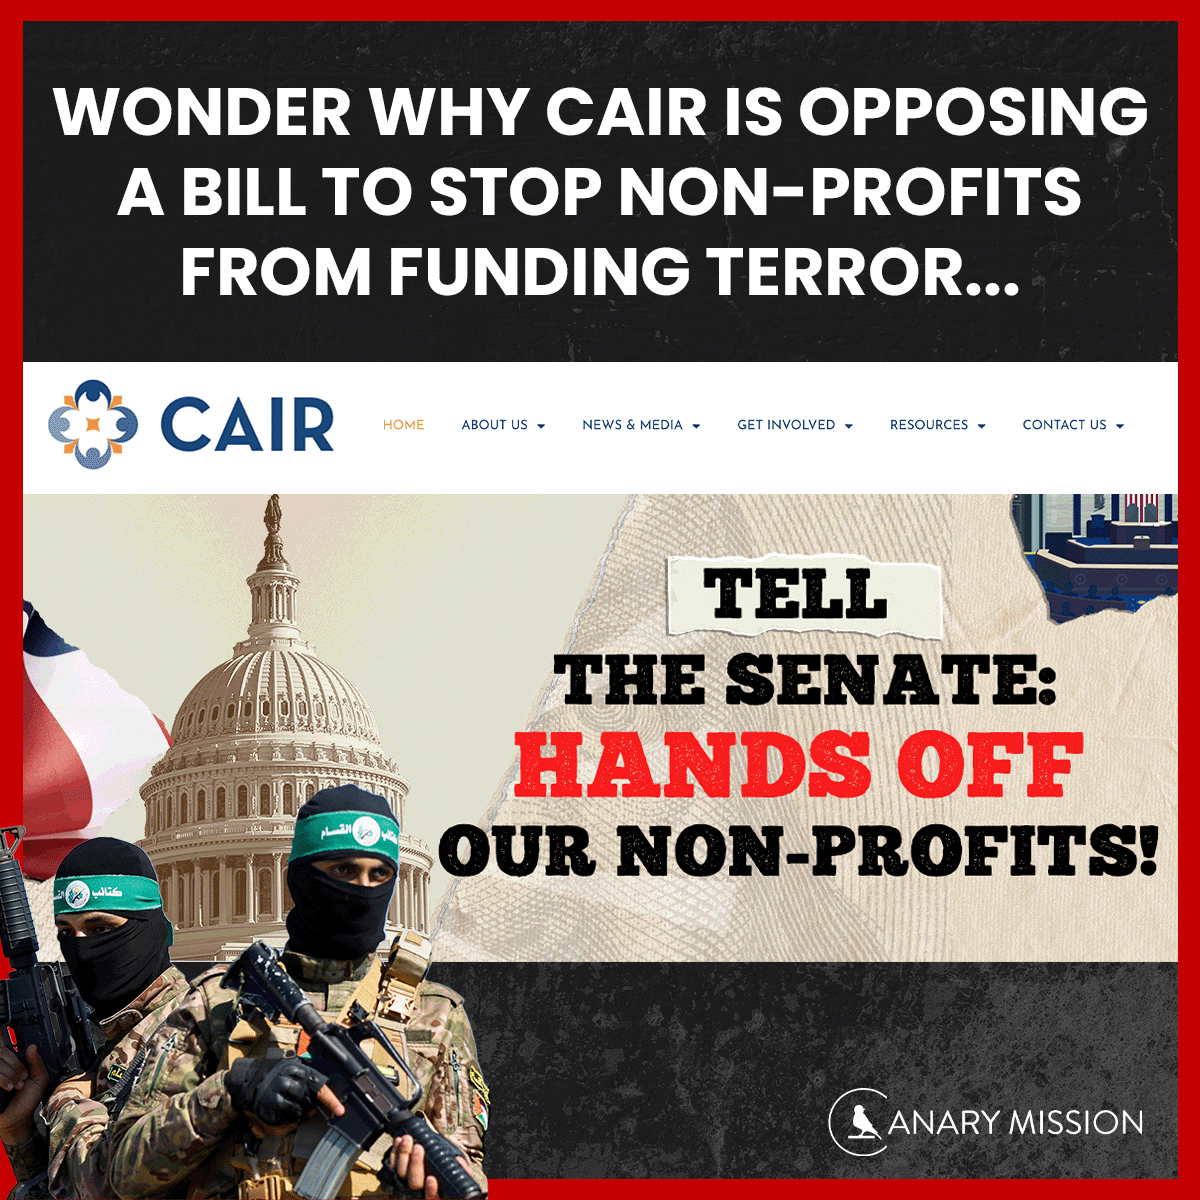 Hmmm, wonder why @CAIRNational is calling out all its supporters to lobby Congress against a bill that would allow @USTreasury to strip any nonprofit organization with links to terror orgs of their tax-exempt status. action.cair.com/a/reject-targe…